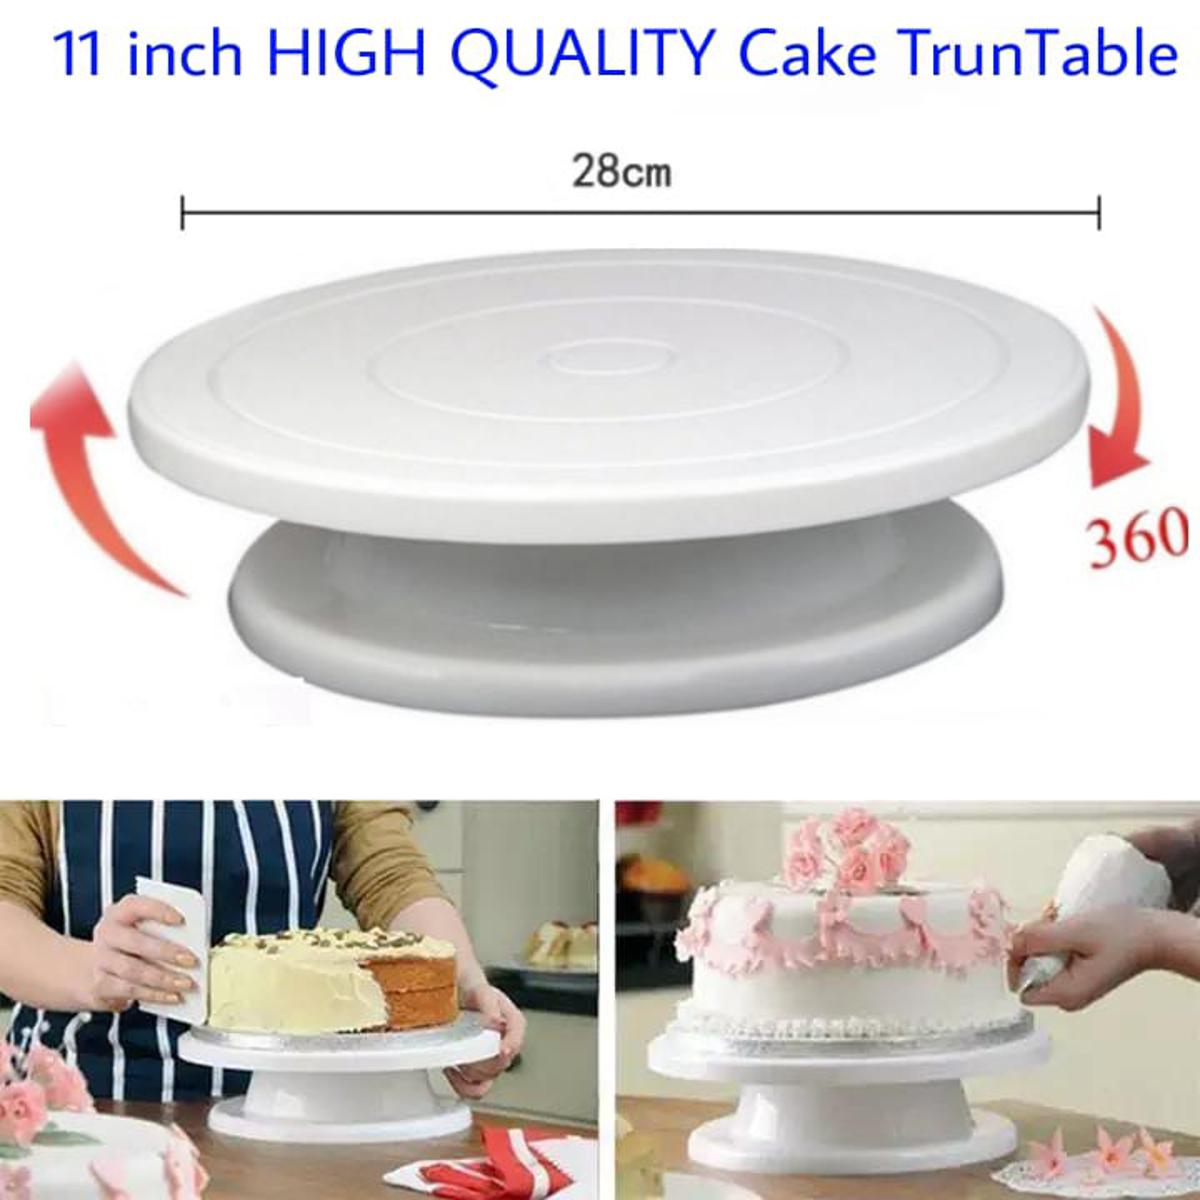 4 Best Cake Turntables to Create Your Next Masterpiece - Something Swanky